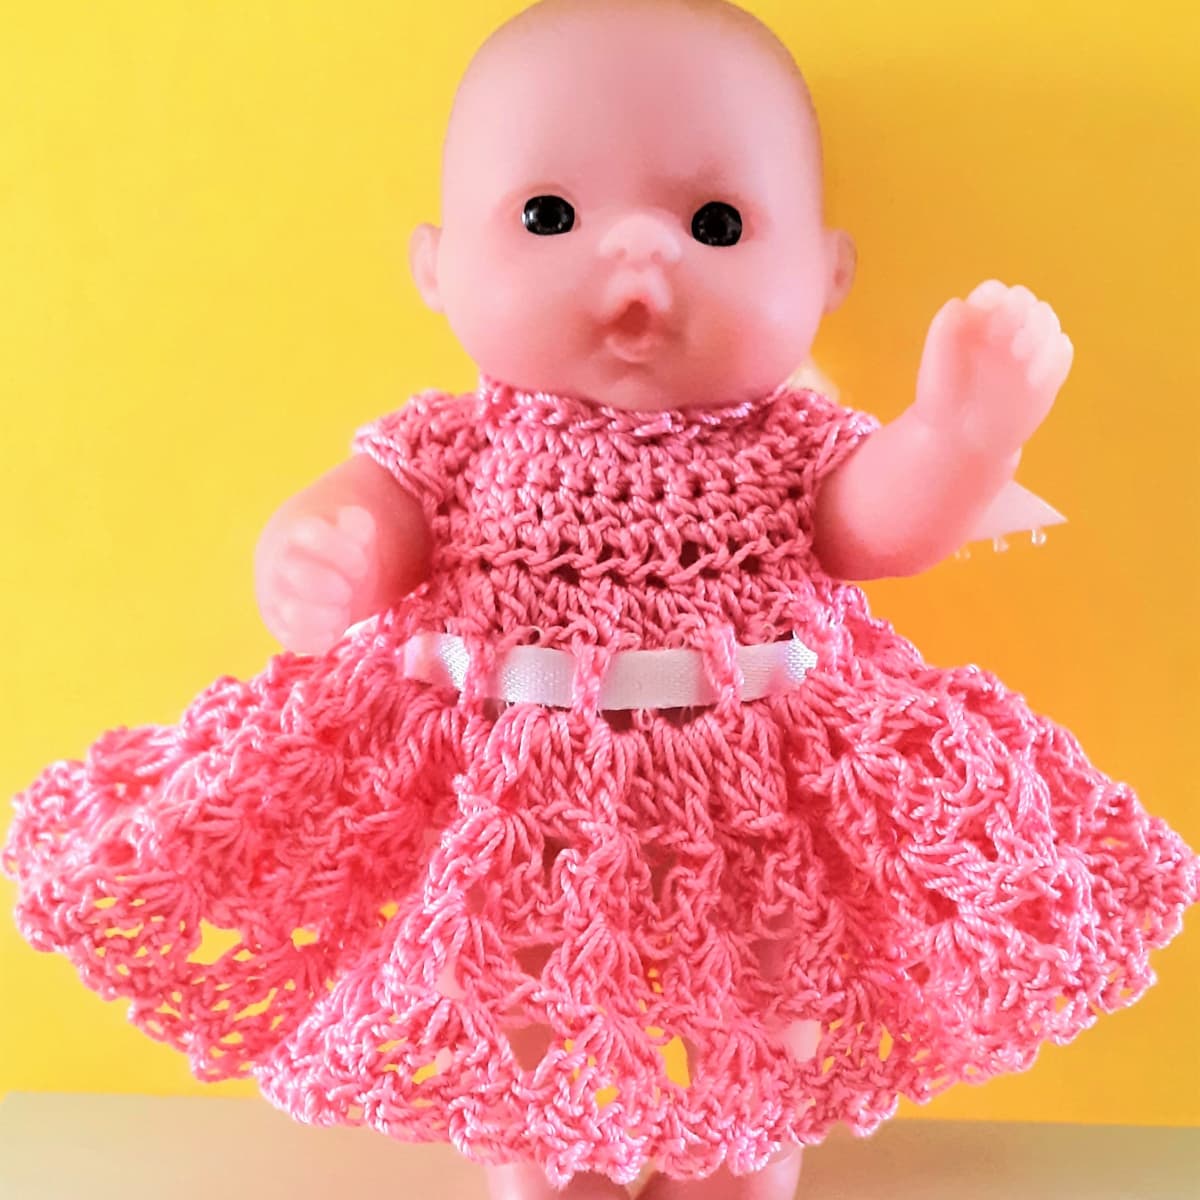 5 NEW Berenguer Lots to Love 5" Inch Baby Dolls Itty Bitty Craft Sale Adorable! 